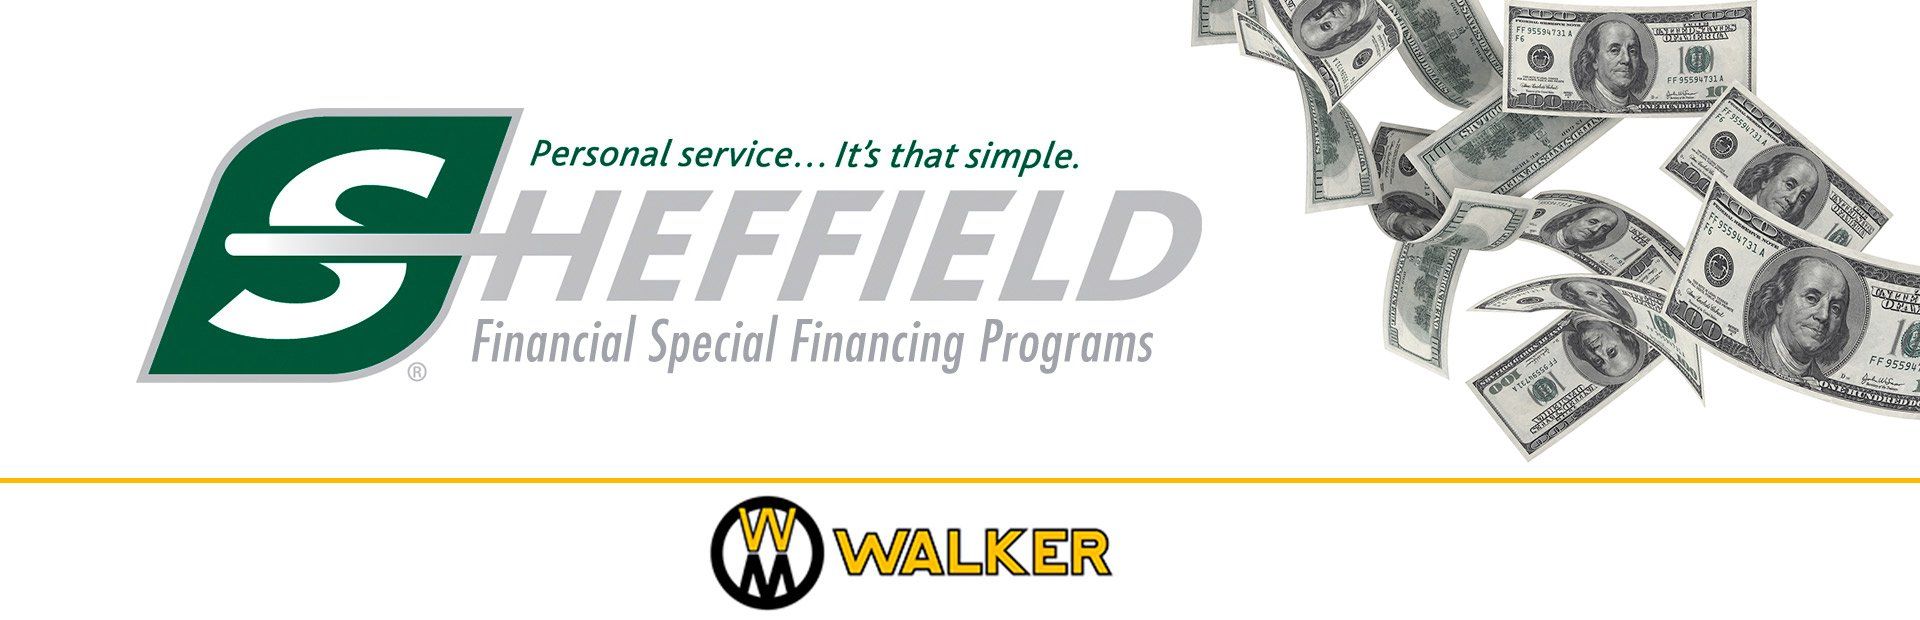 Apply now with Sheffield Financial